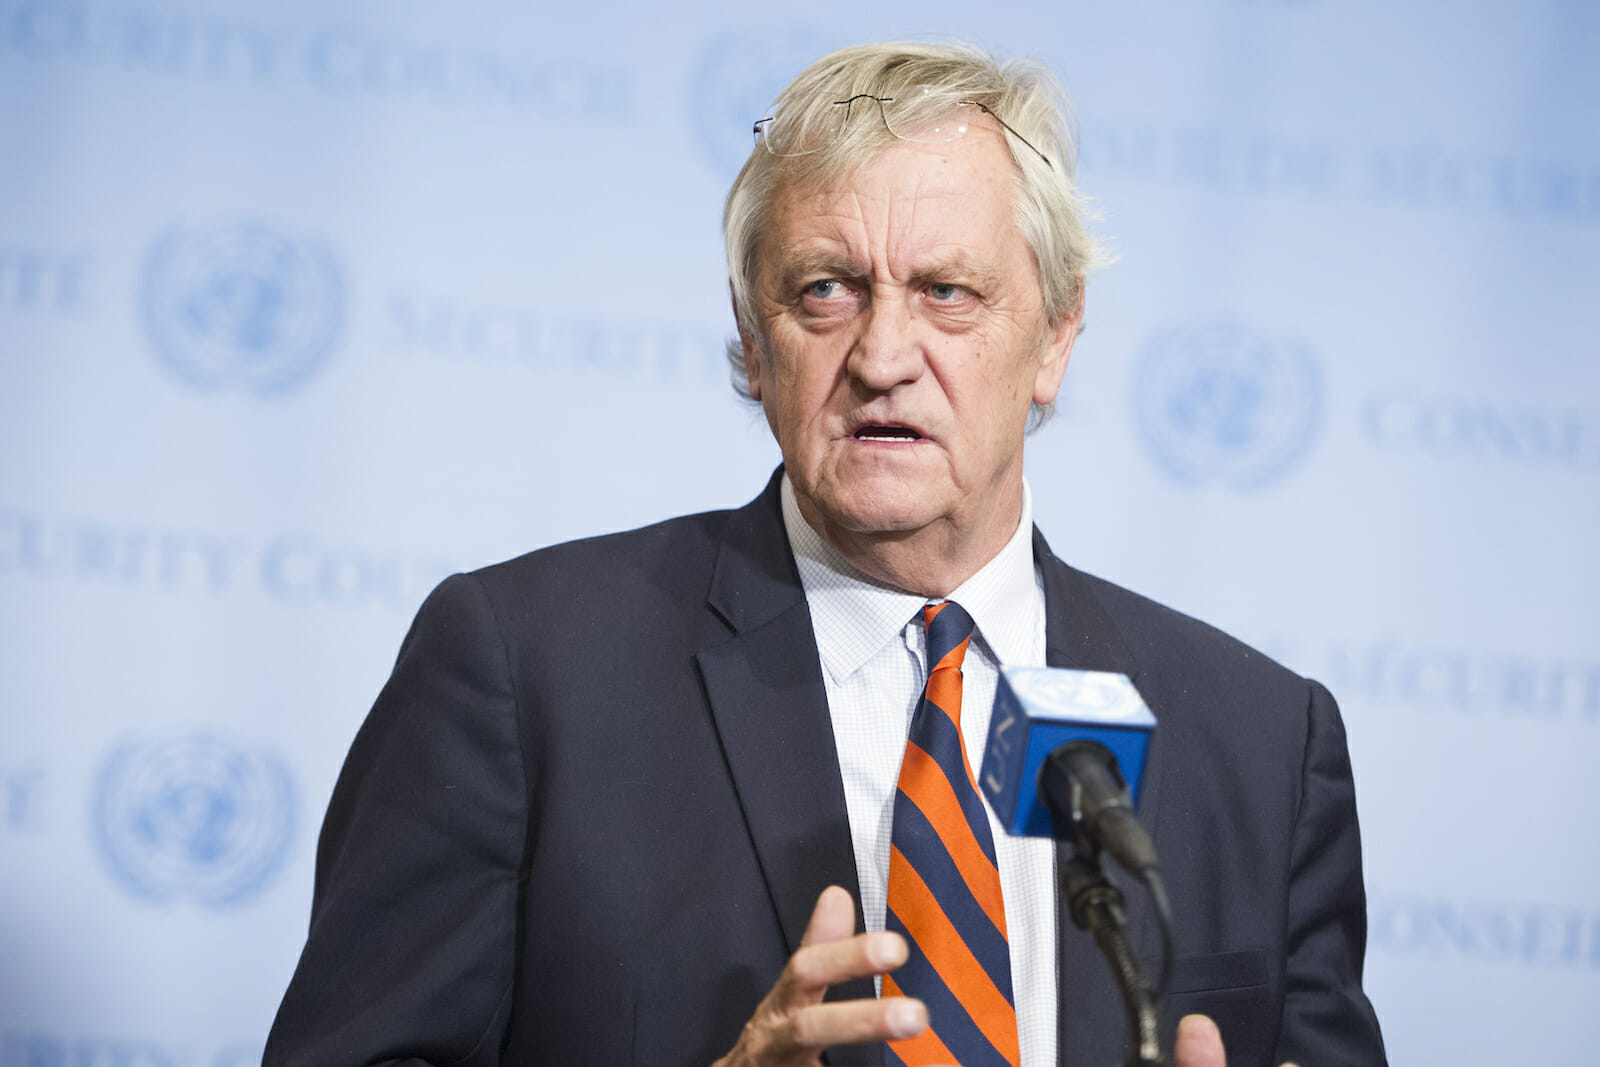 Sudan conflict diminishes South Sudan peace efforts – Haysom